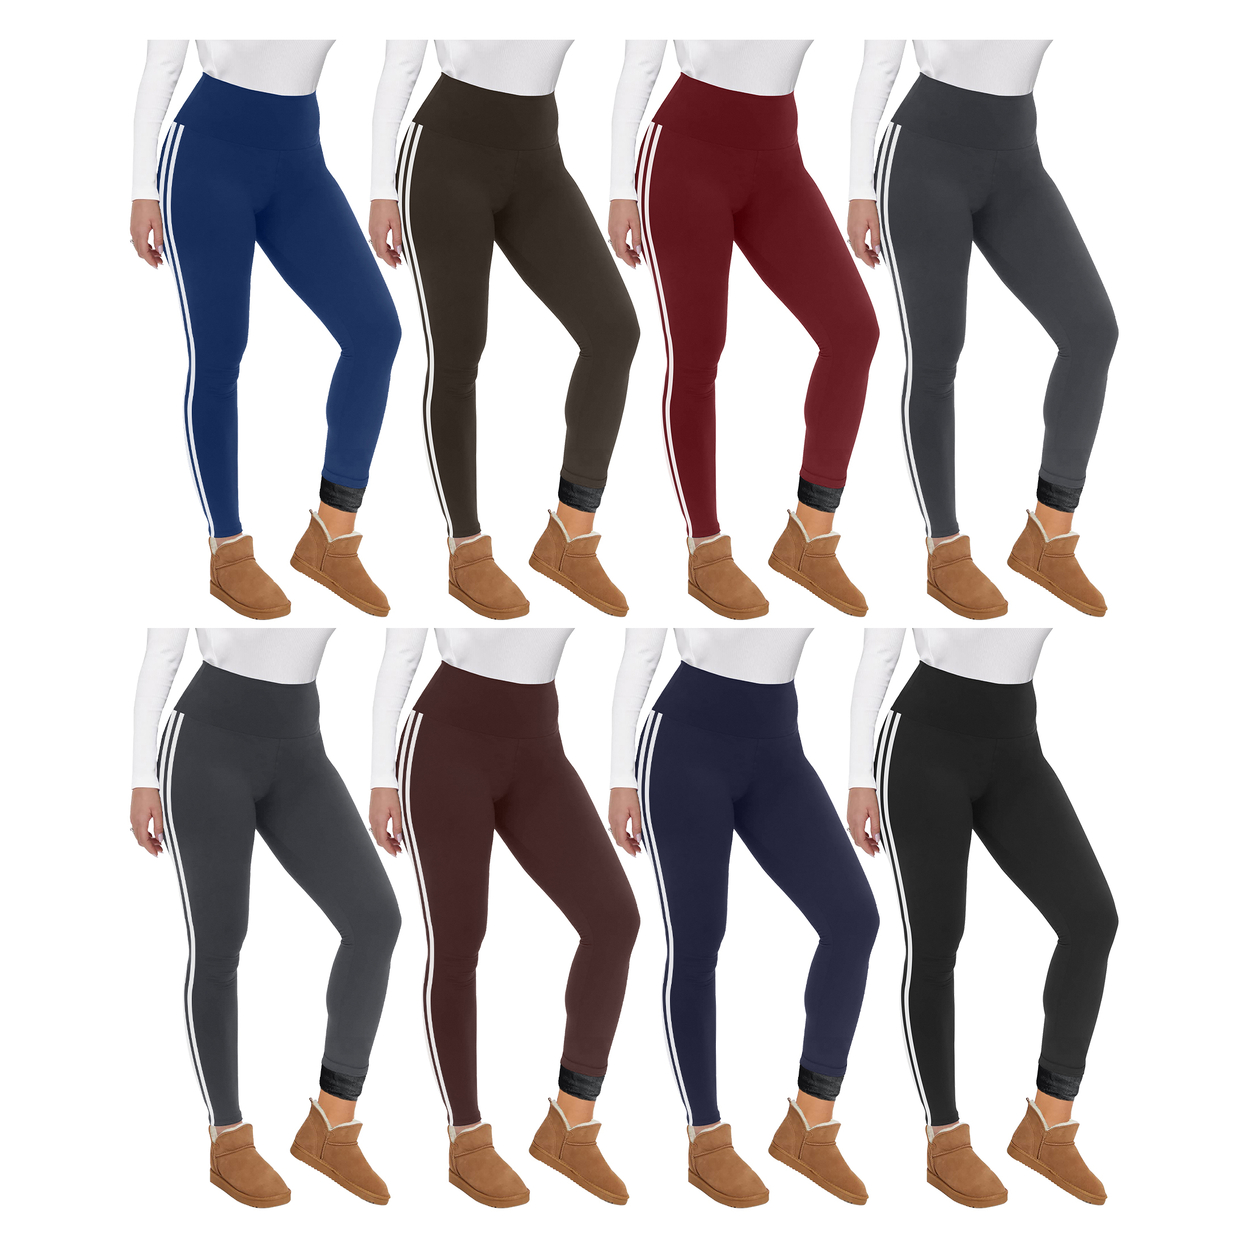 3-Pack: Women's Ultra Soft Winter Warm Cozy Striped Fur Lined Yoga Leggings - Assorted, Xx-large